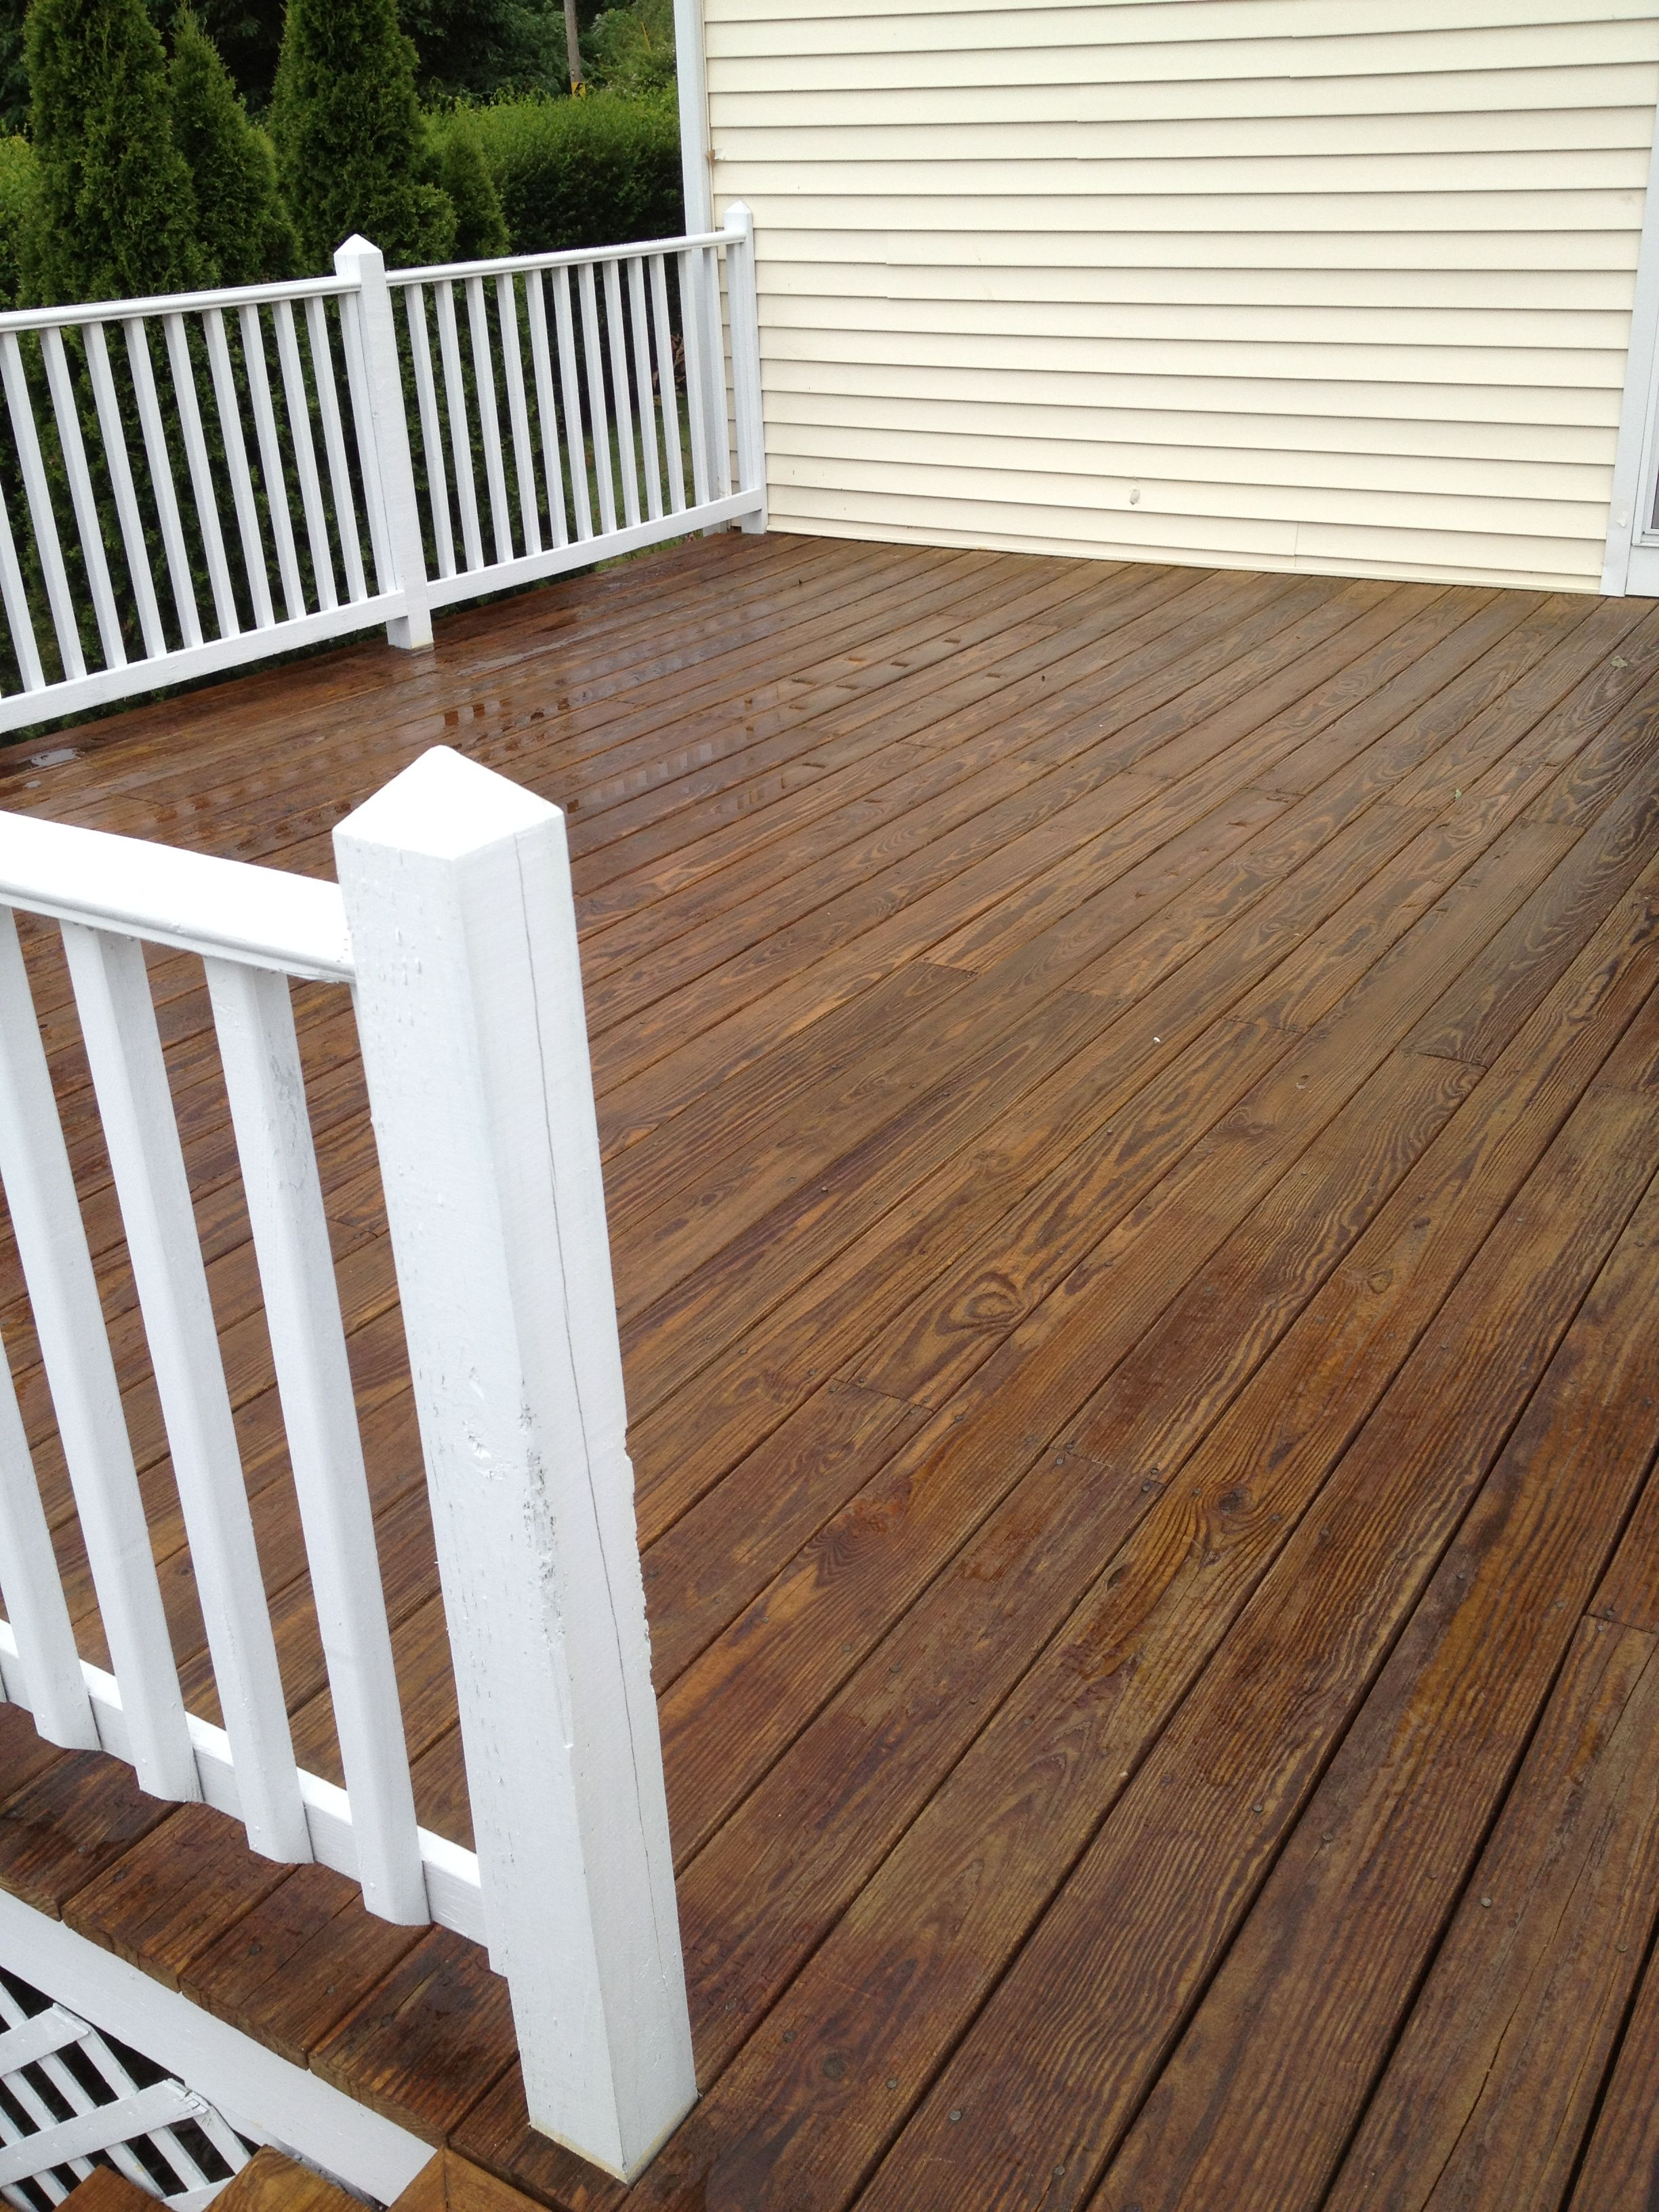 Pressure Treated Wood Decking And White Painted Trim New England within dimensions 2448 X 3264